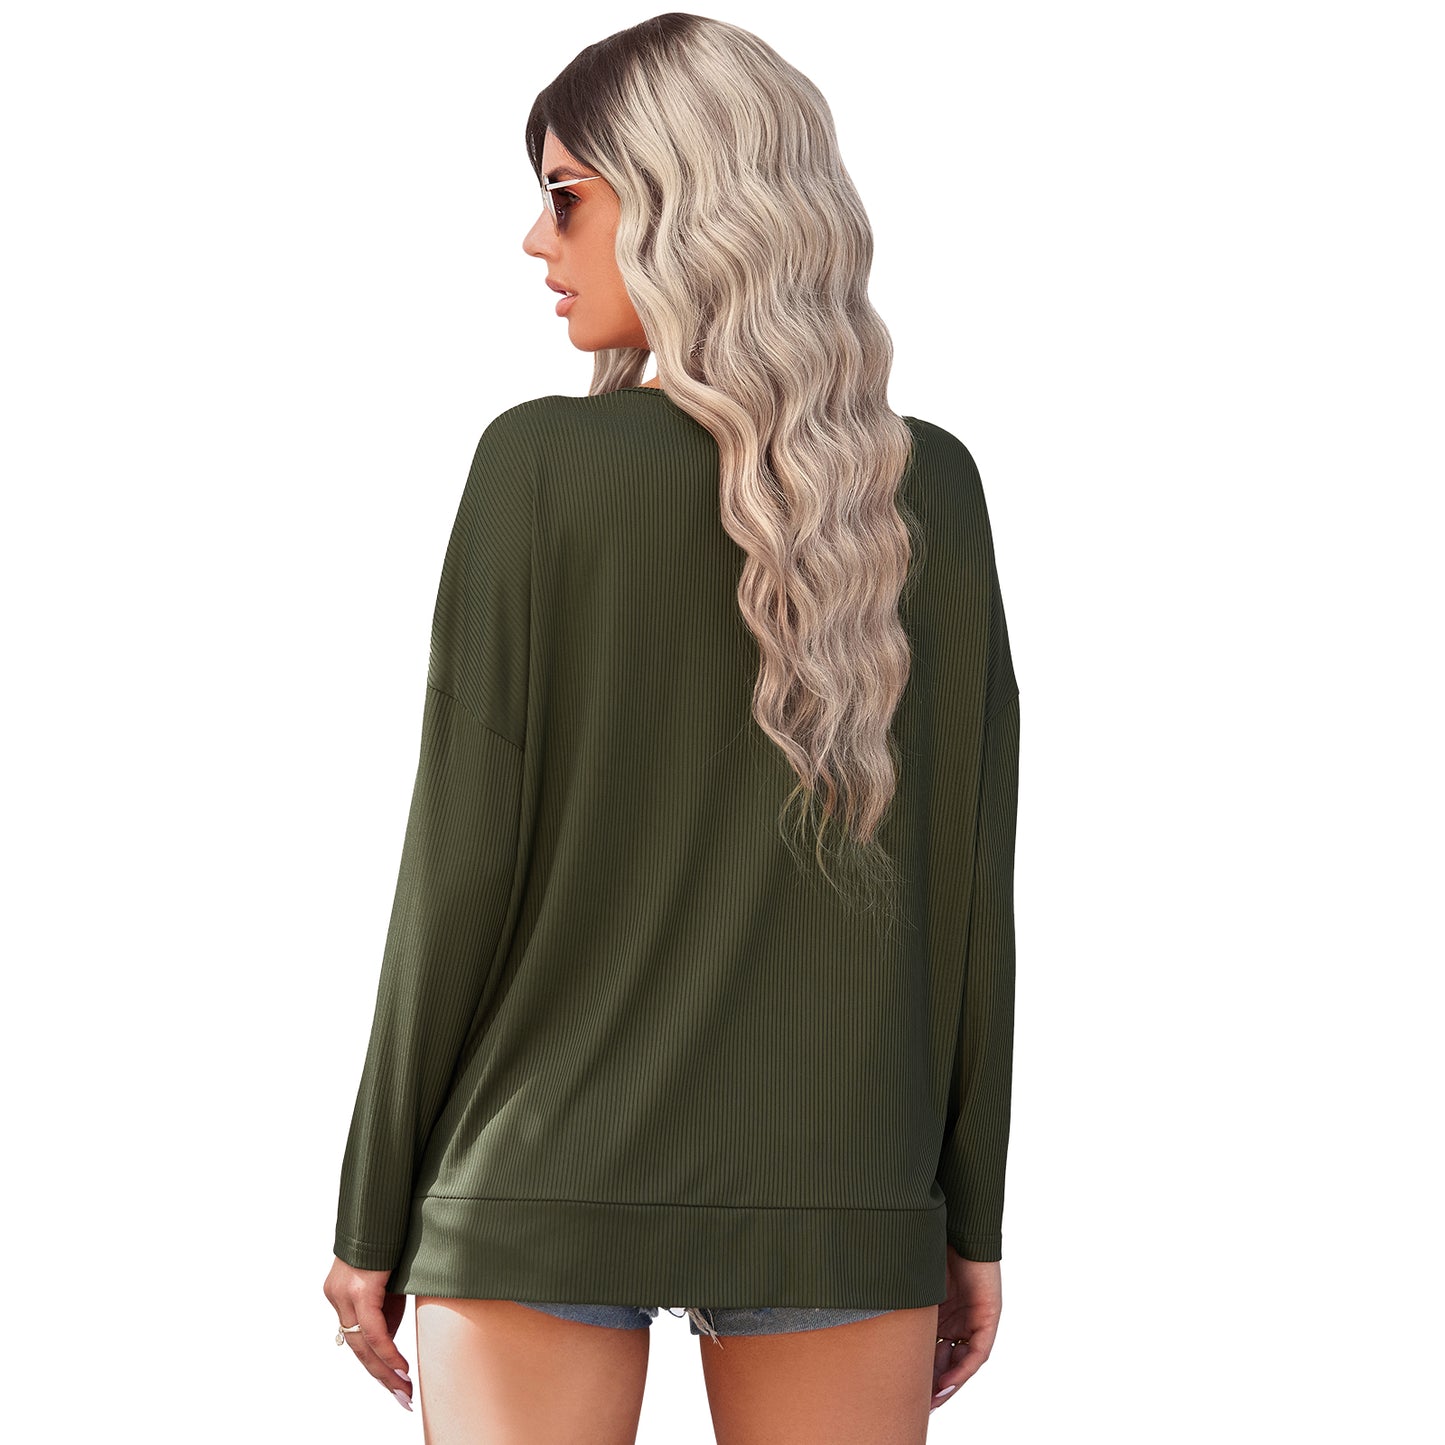 YESFASHION Women Clothing Solid Color Pullover Thin Knitted Sweaters